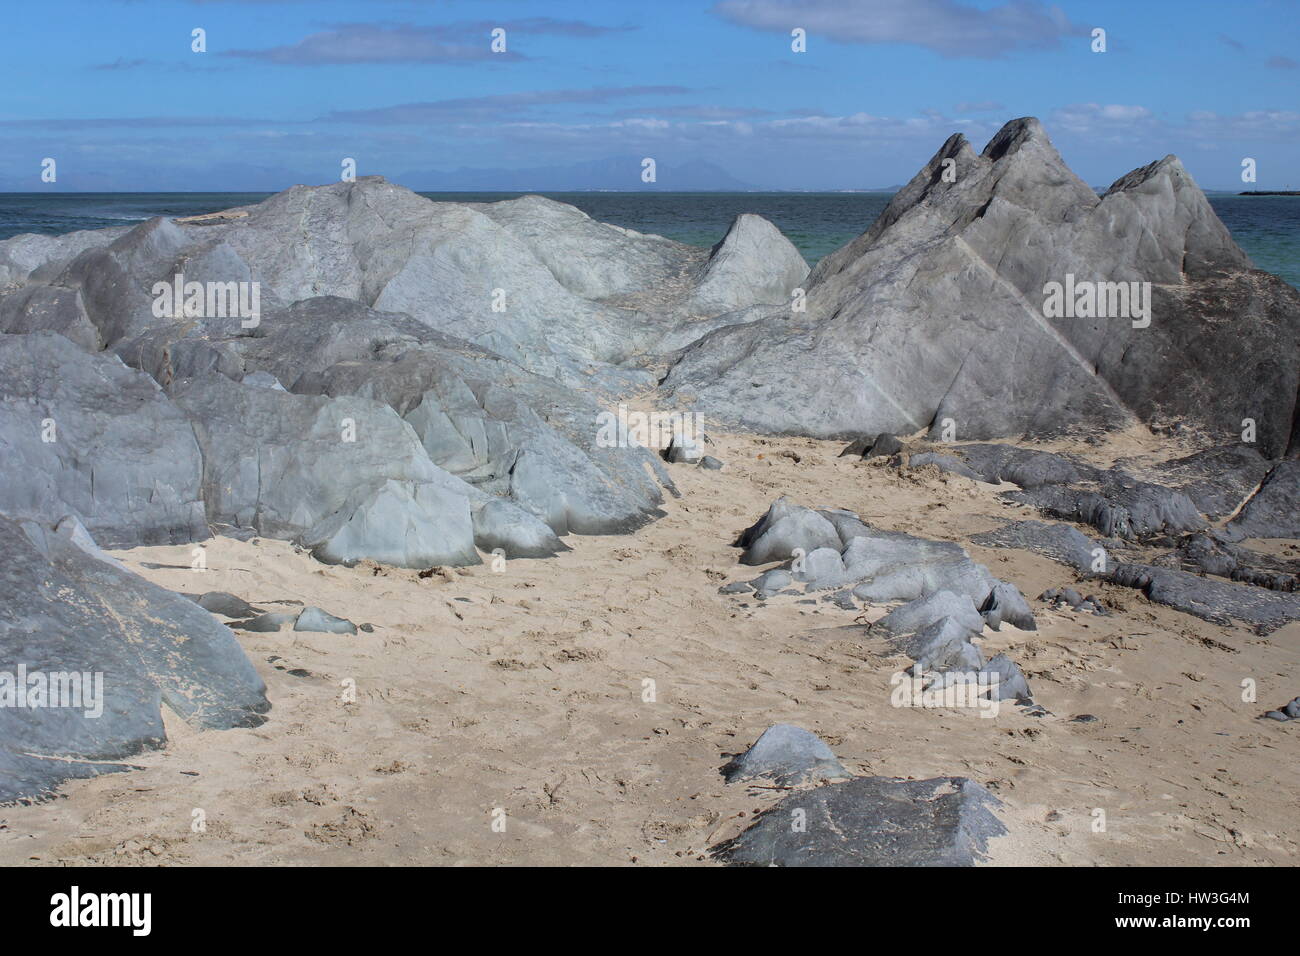 Rock formations at Gordons Bay beach, Western Cape, South Africa Stock Photo